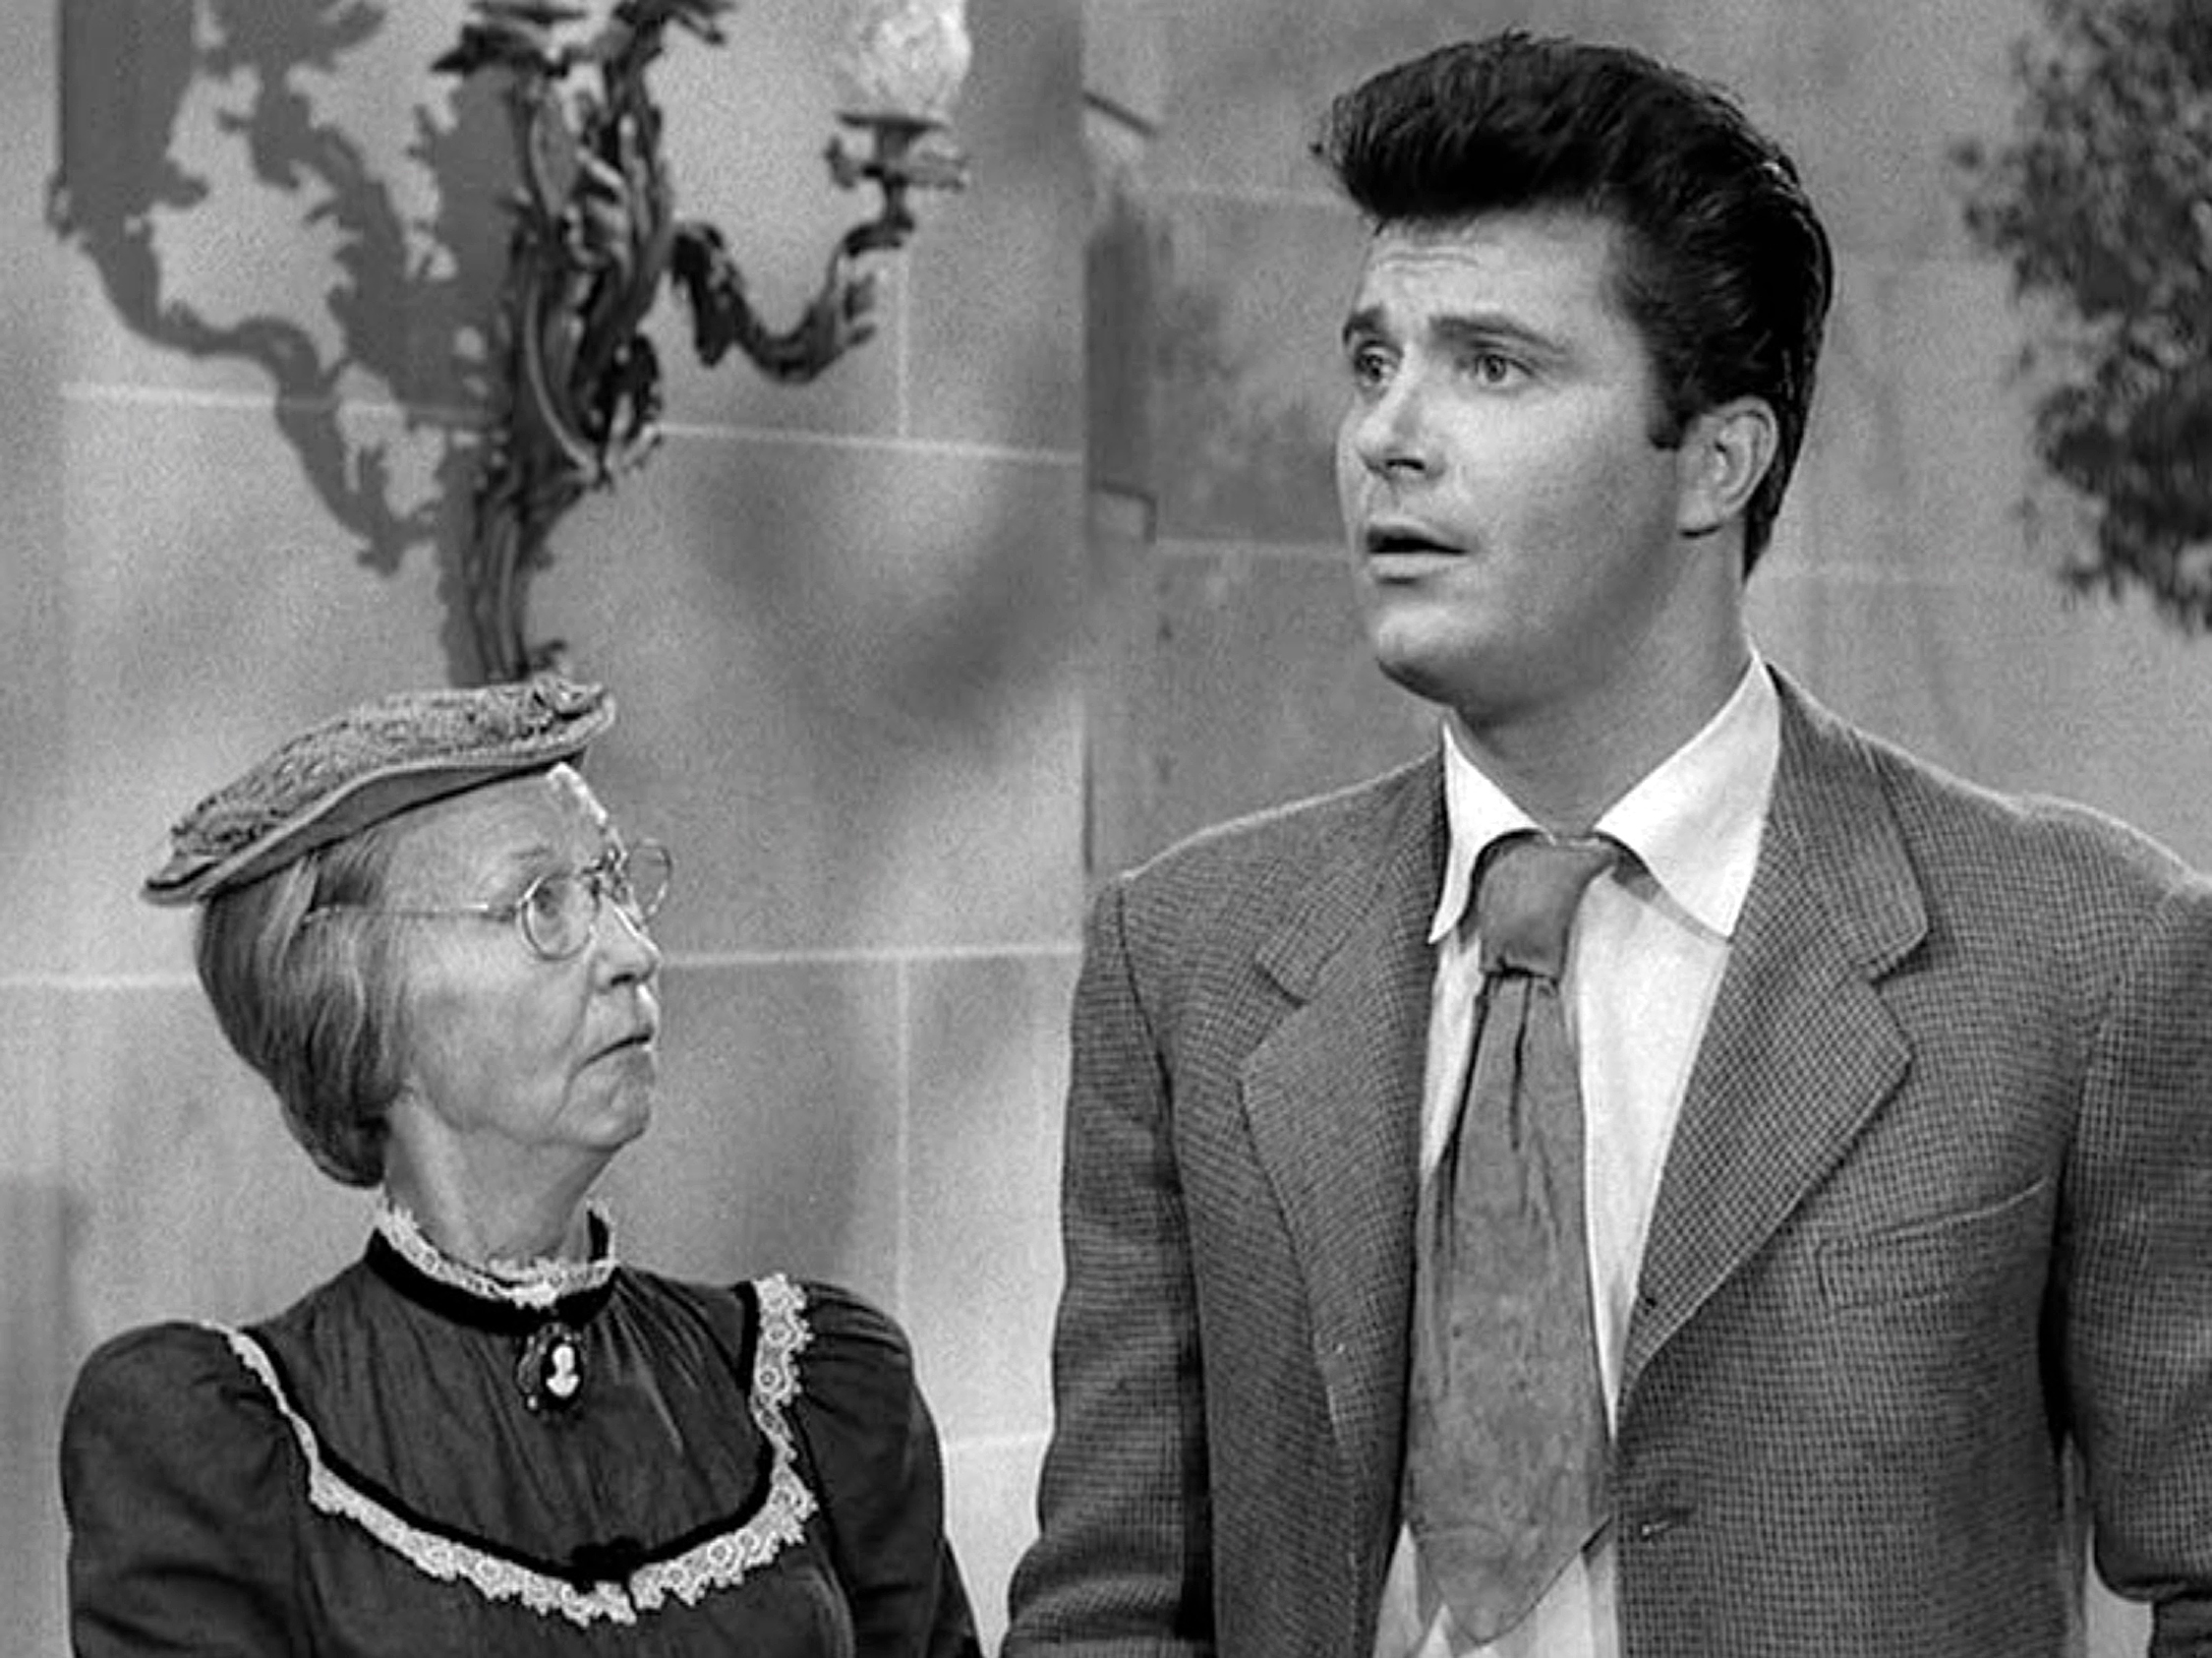 Irene Ryan as Daisy Moses and Max Baer Jr. as Jethro Bodine in "The Beverly Hillbillies" in Los Angeles, 1963. | Source: Getty Images